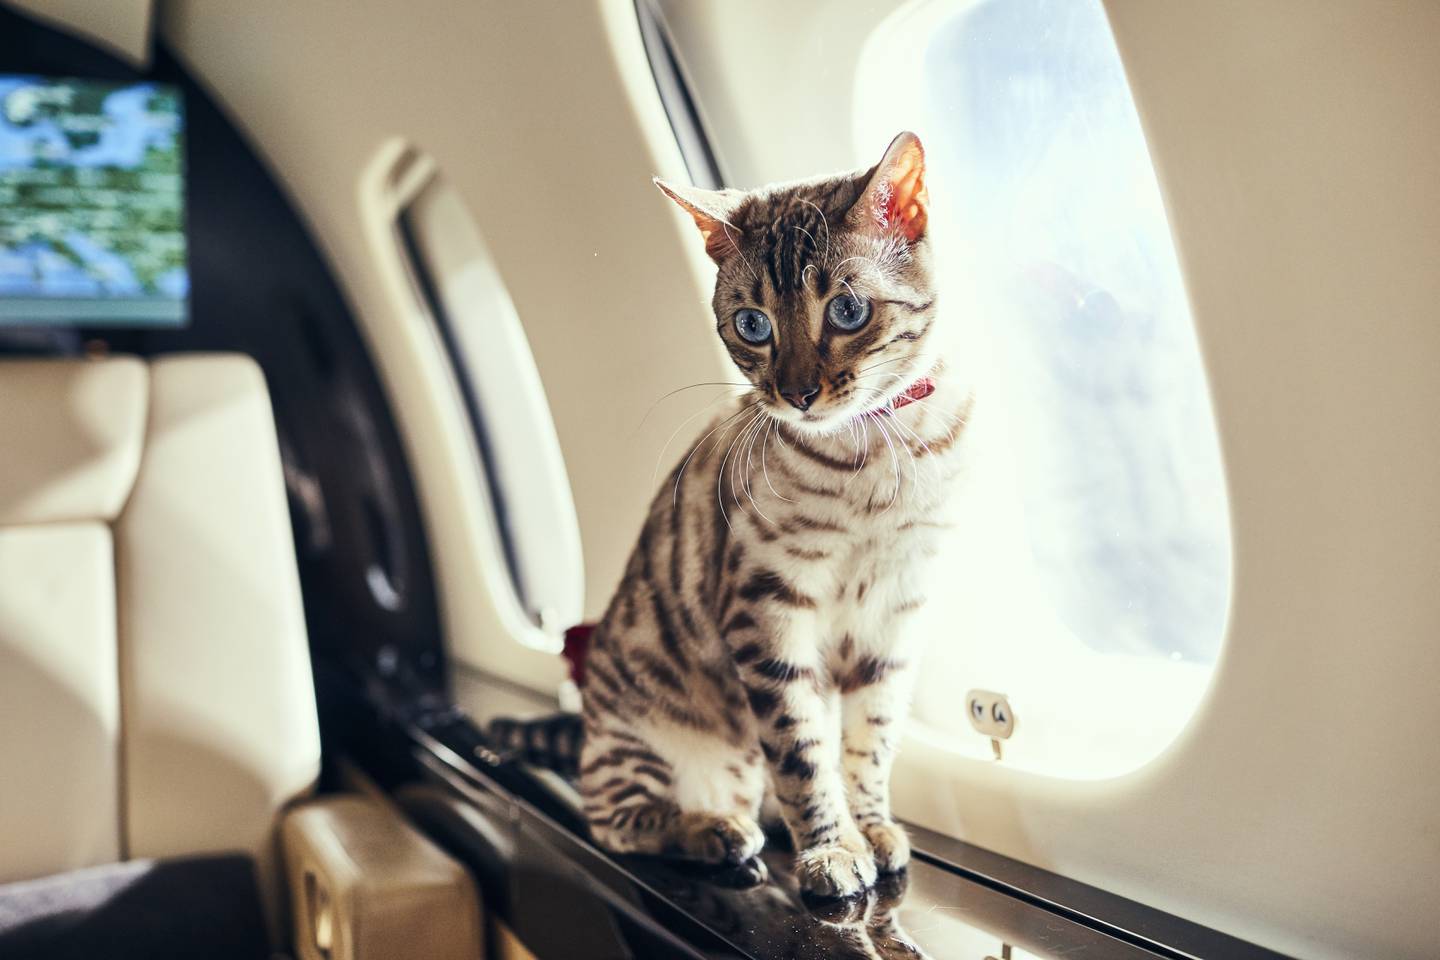 Minnie the cat became VistaJet crew for a day after flying undocumented to Turks and Caicos. Photo: VistaJet